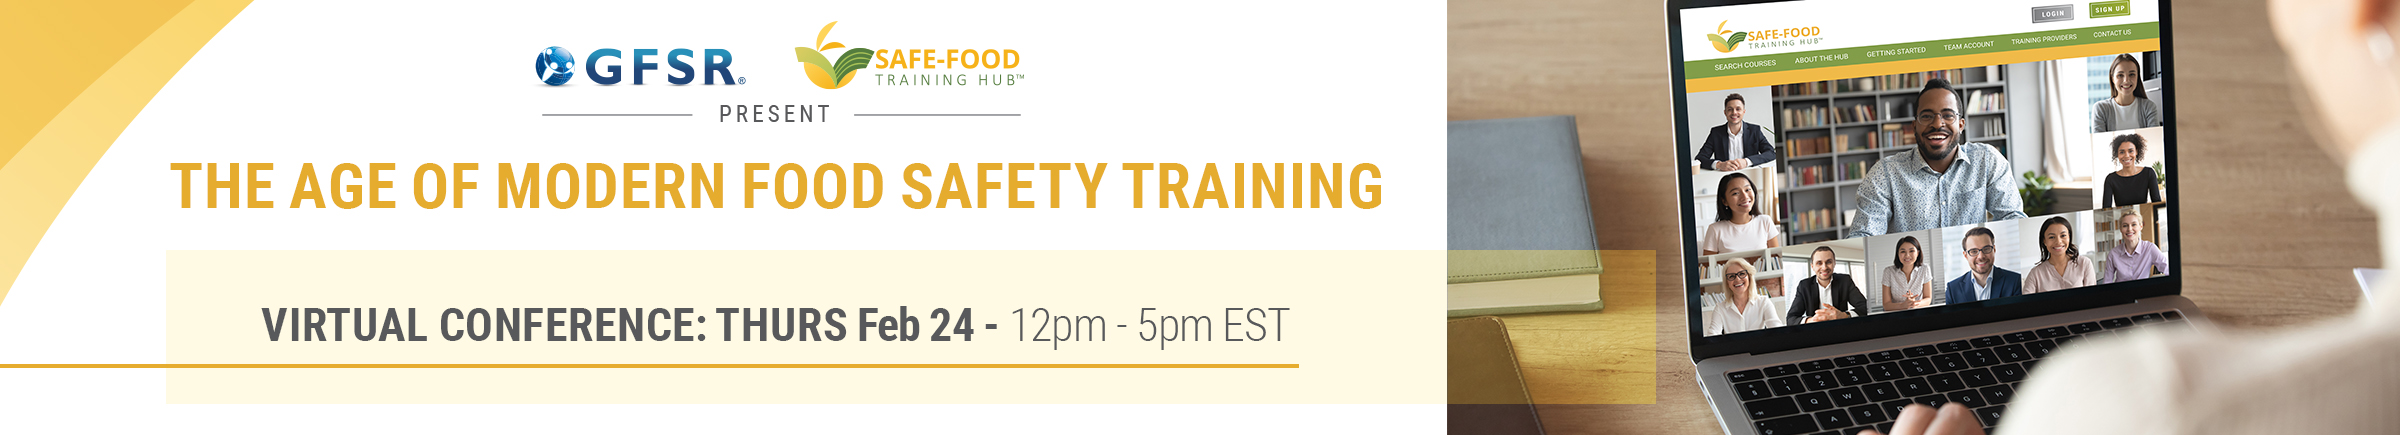 GFSR and SFTH present The Age of Modern Food Safety Training, a virtual conference.